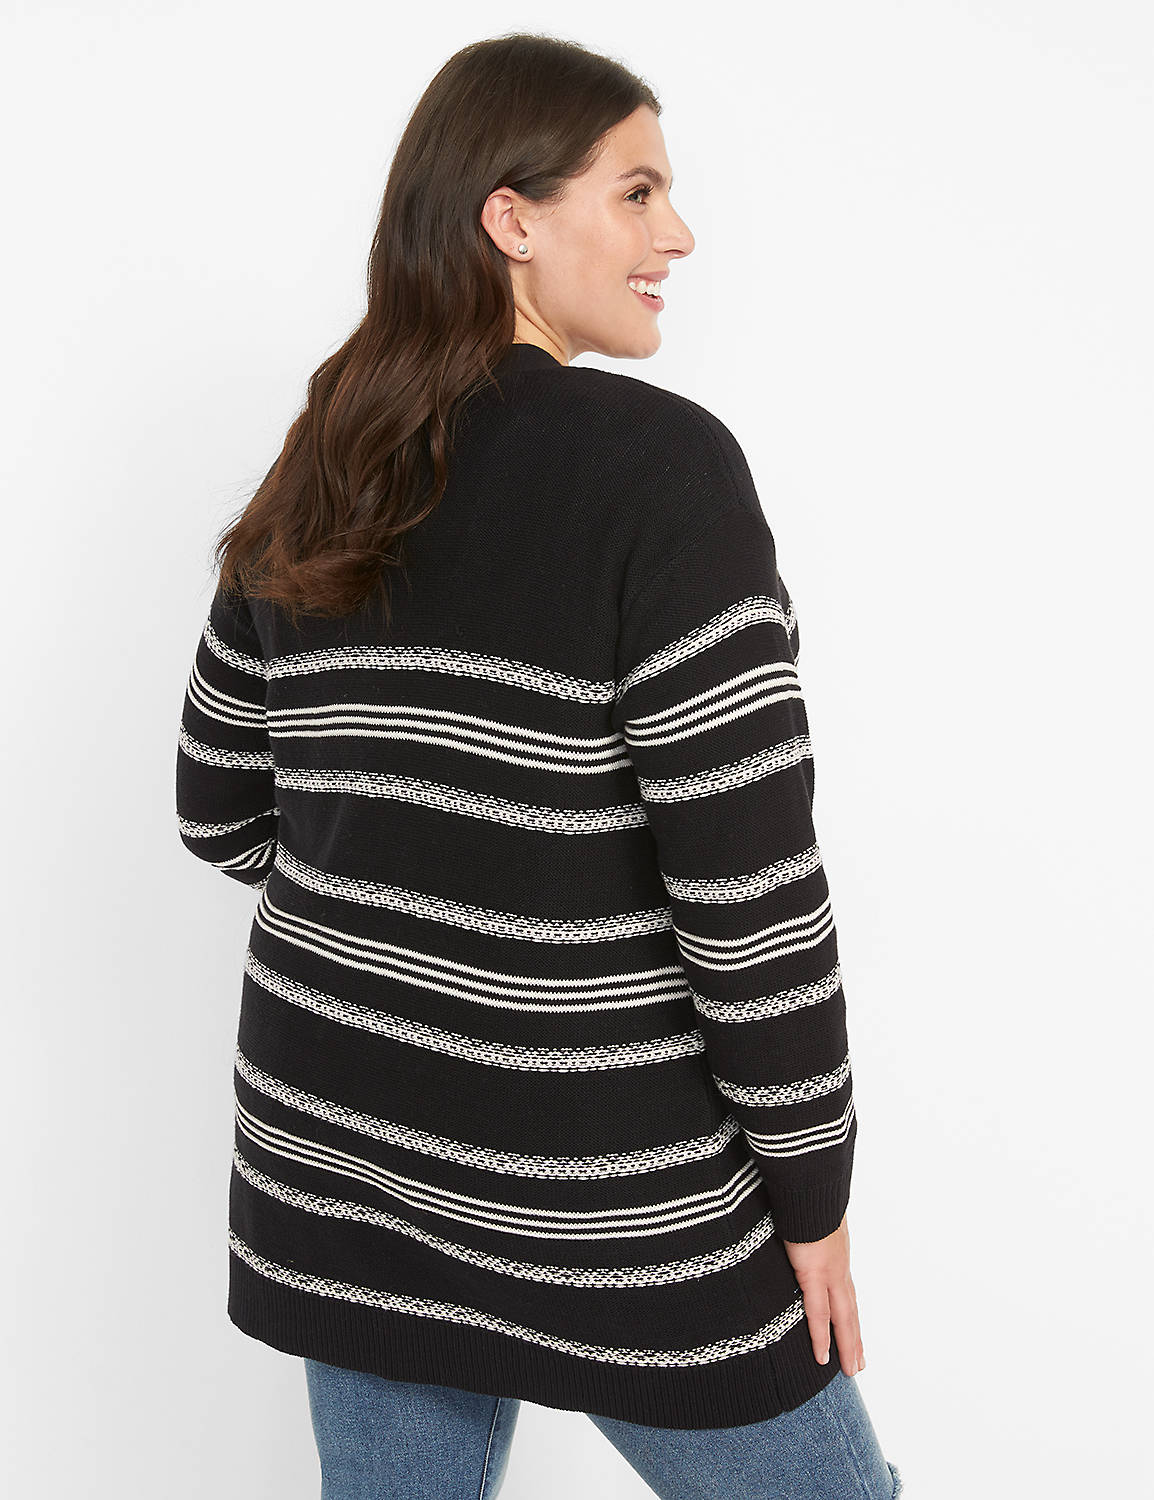 Long Sleeve Stripe Open Front Cardi Product Image 2